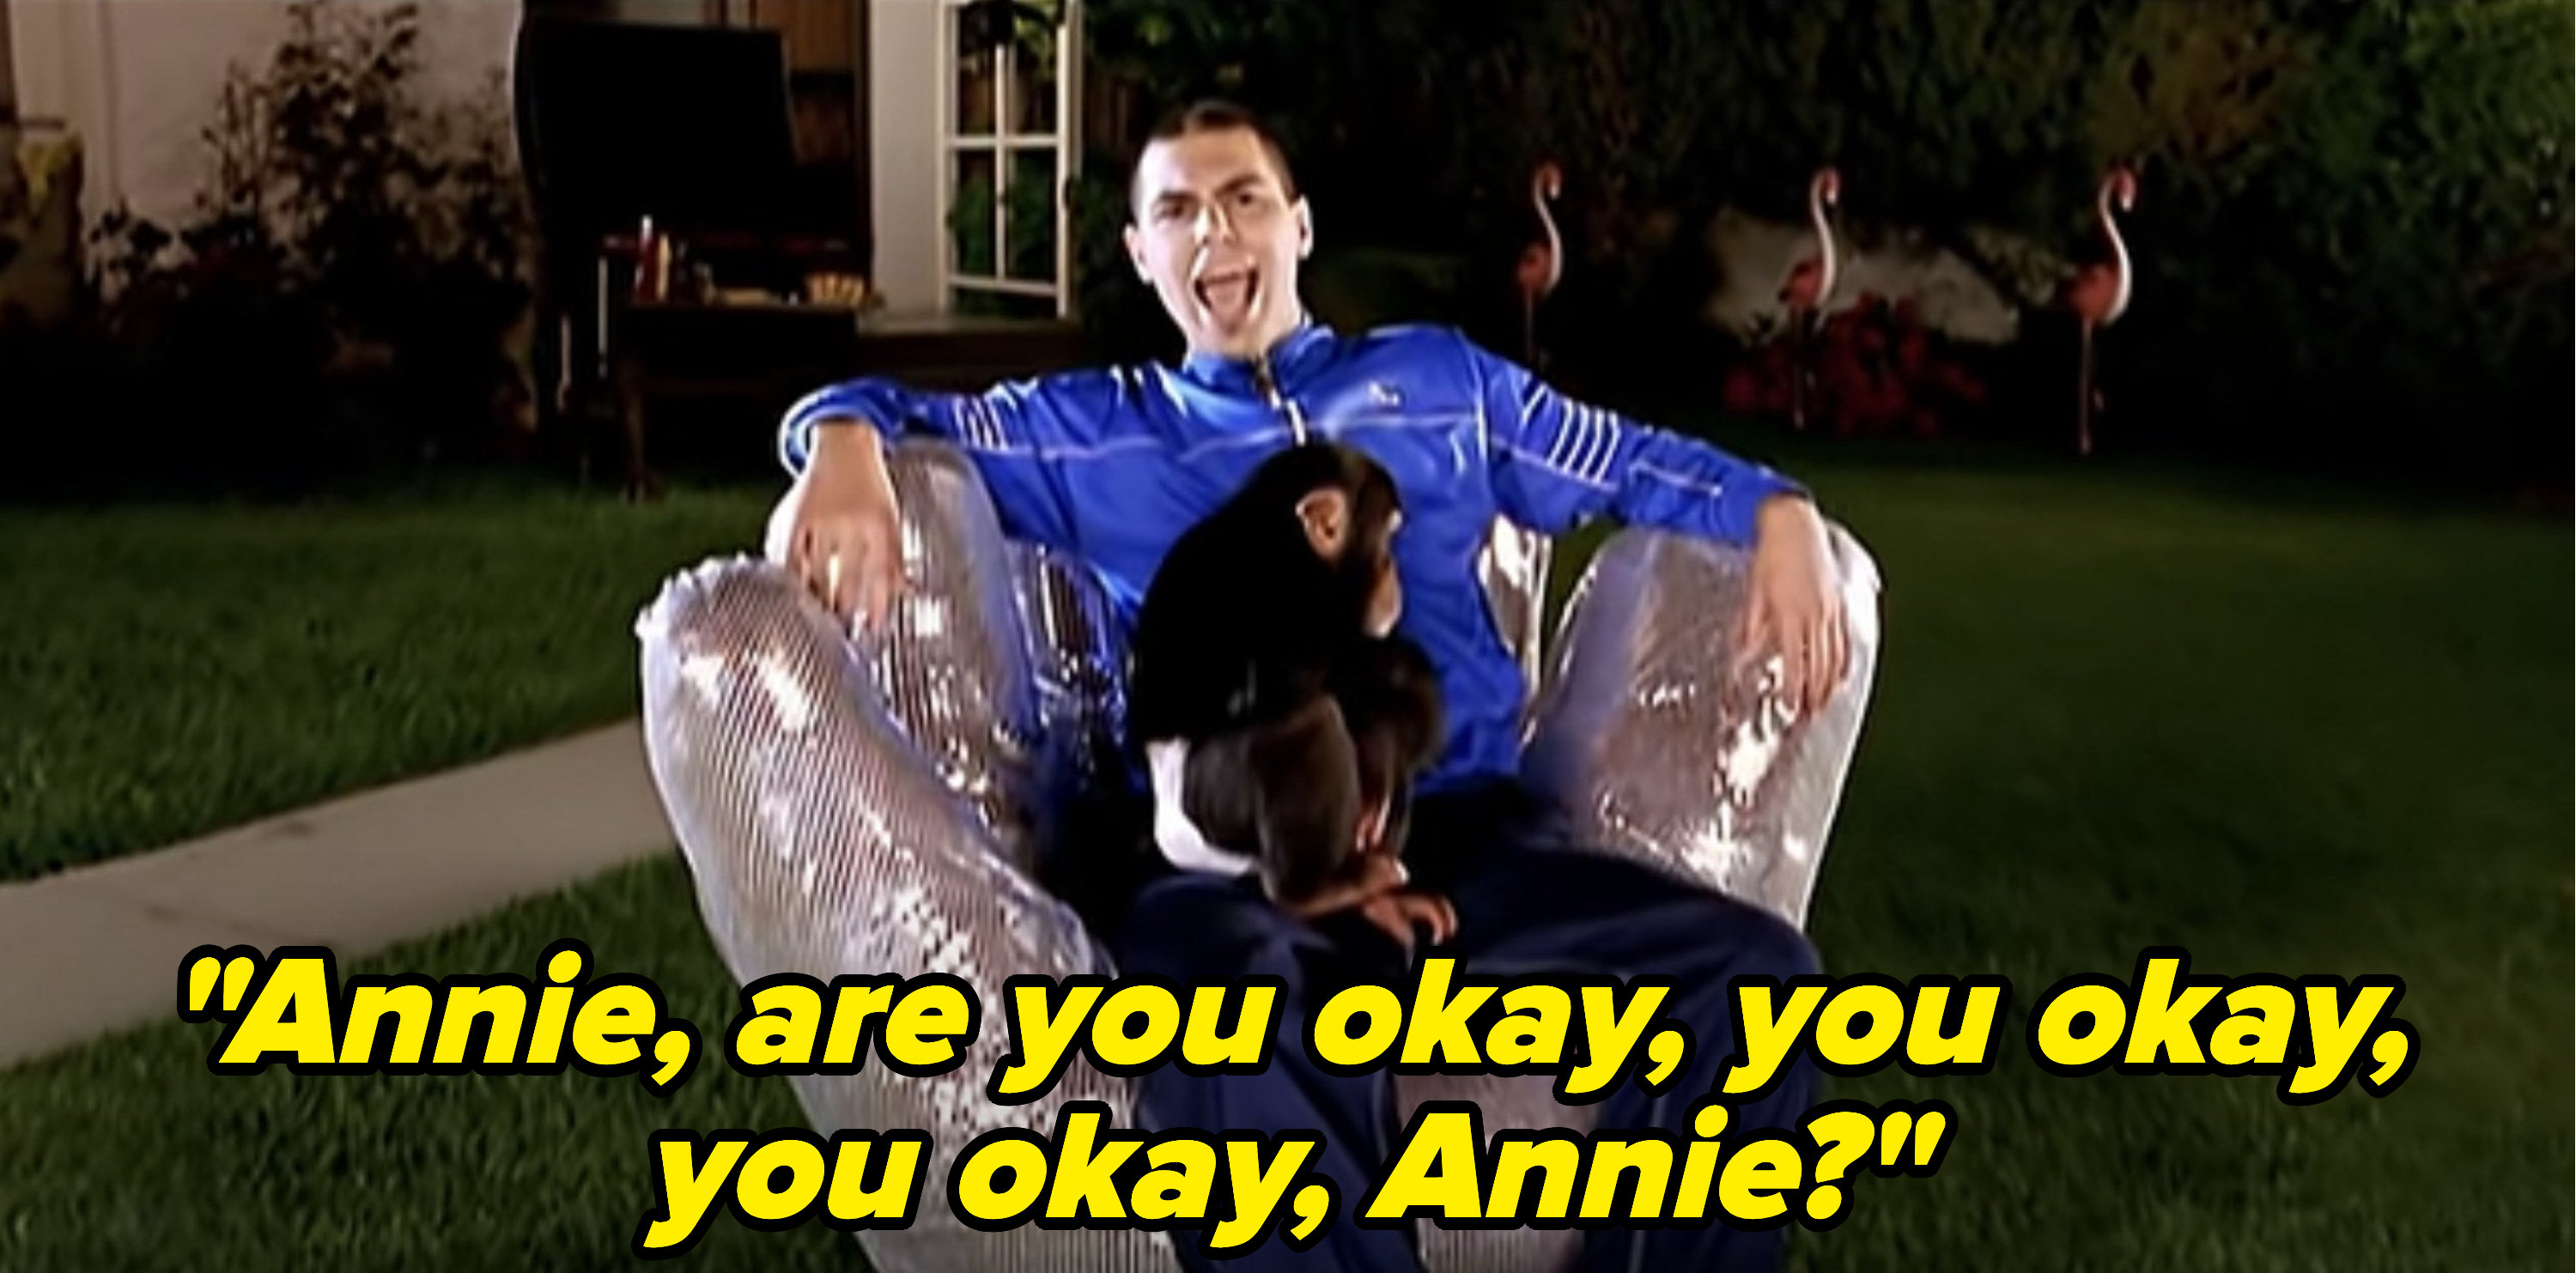 Alien Ant Farm singer sits on a silver glove chair with a monkey on his lap